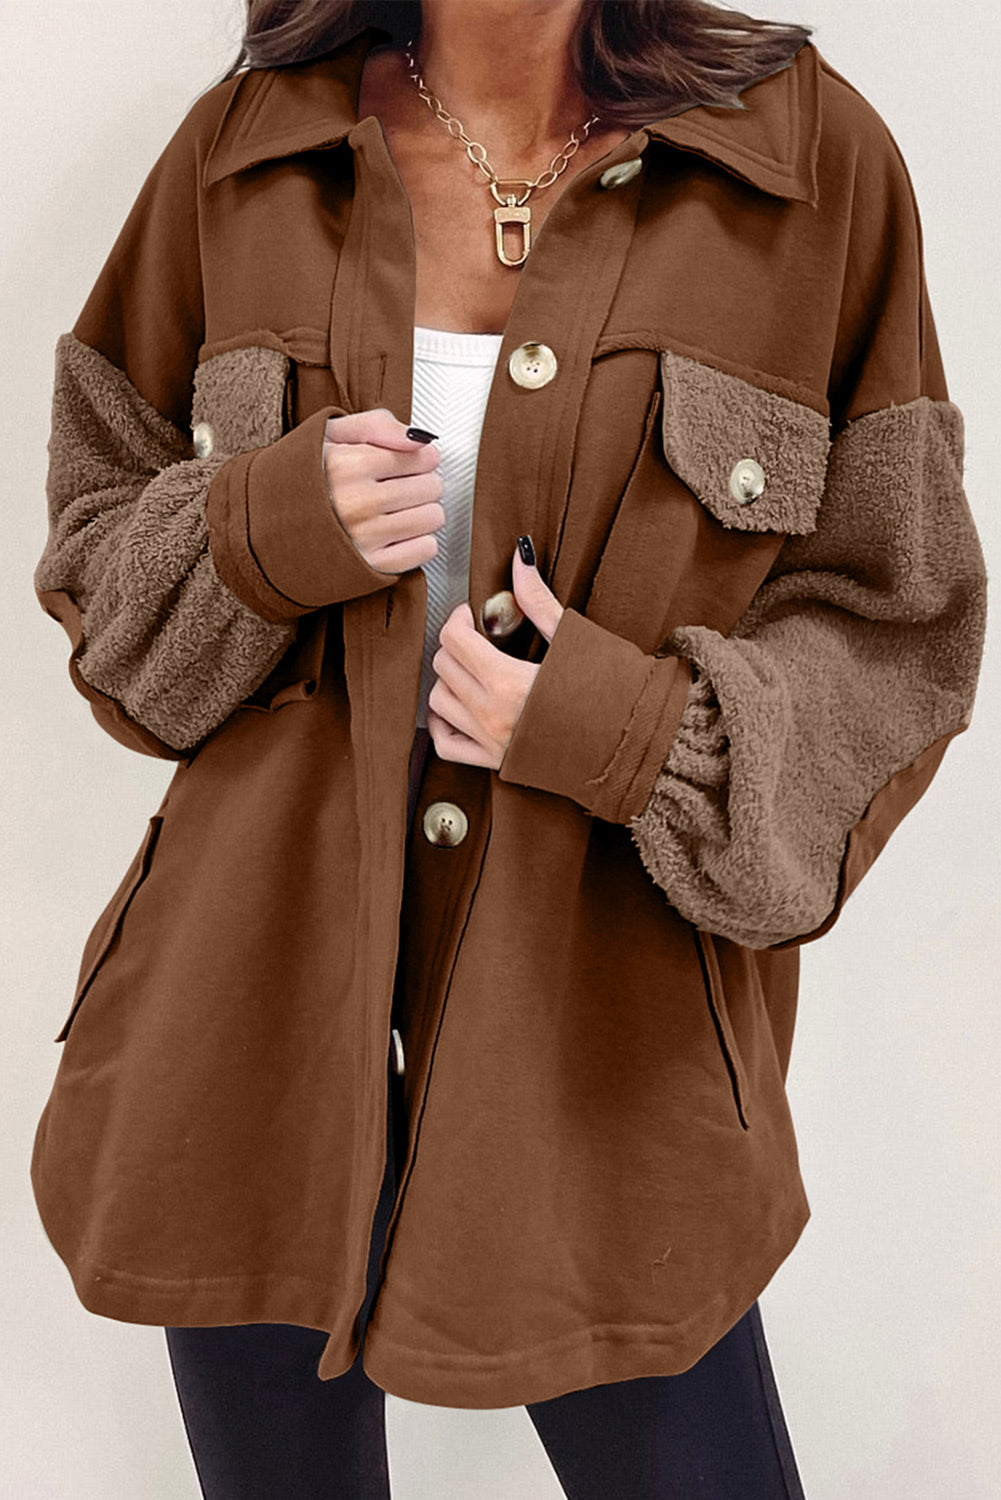 Chestnut 50%Polyester+50%Cotton - Exposed Seam Elbow Patch Oversized Shacket in Peach Blossom, Sage, or Chestnut - womens shacket at TFC&H Co.